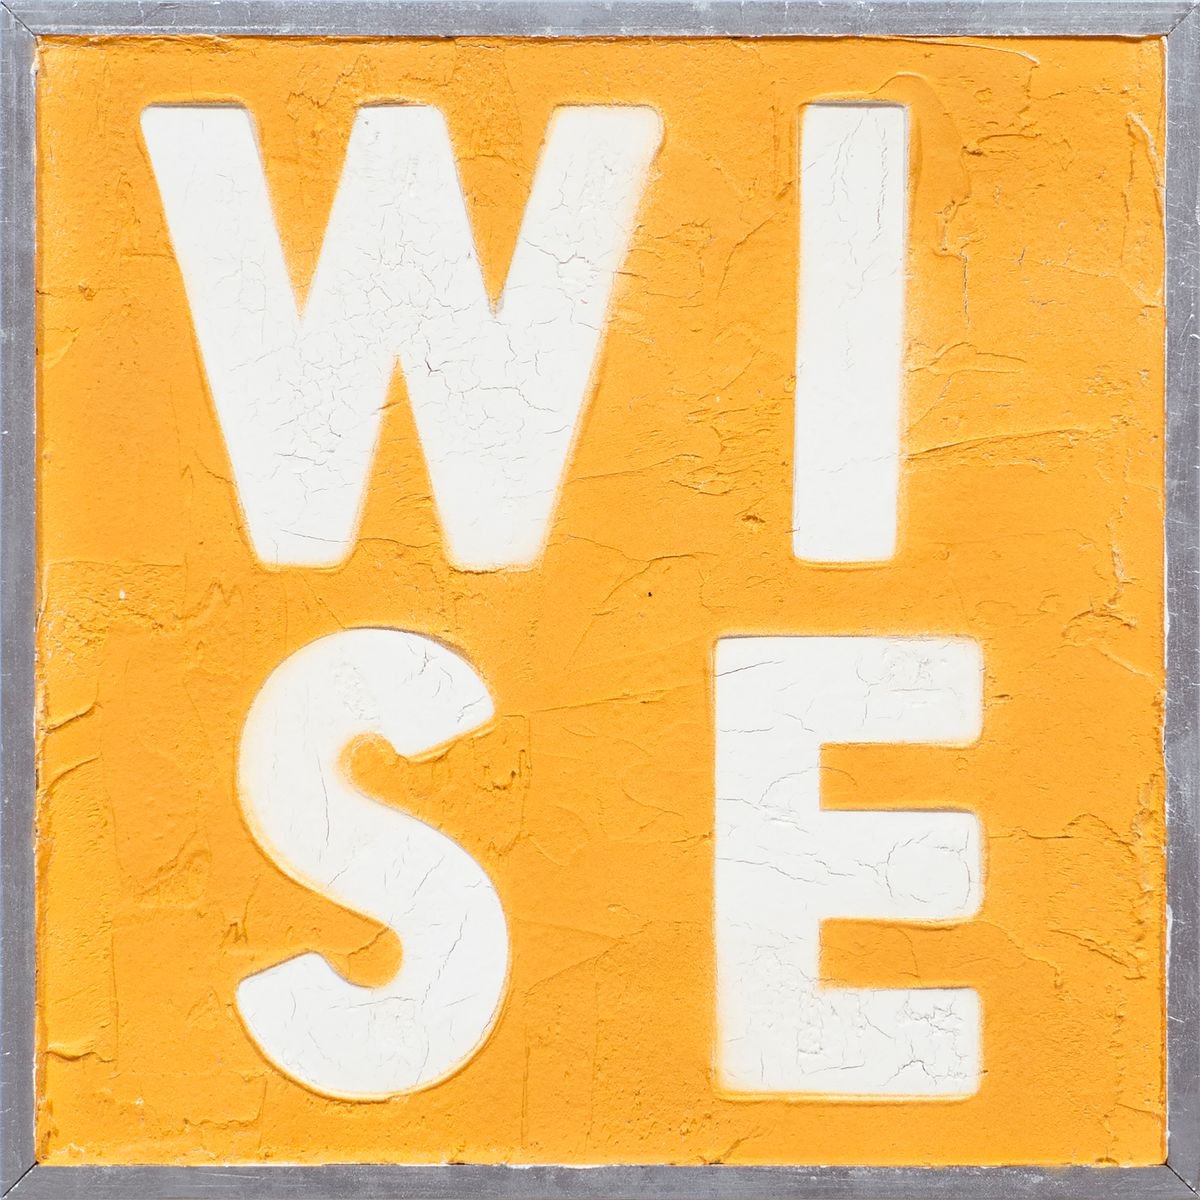 WISE by Dangerous Minds Artists